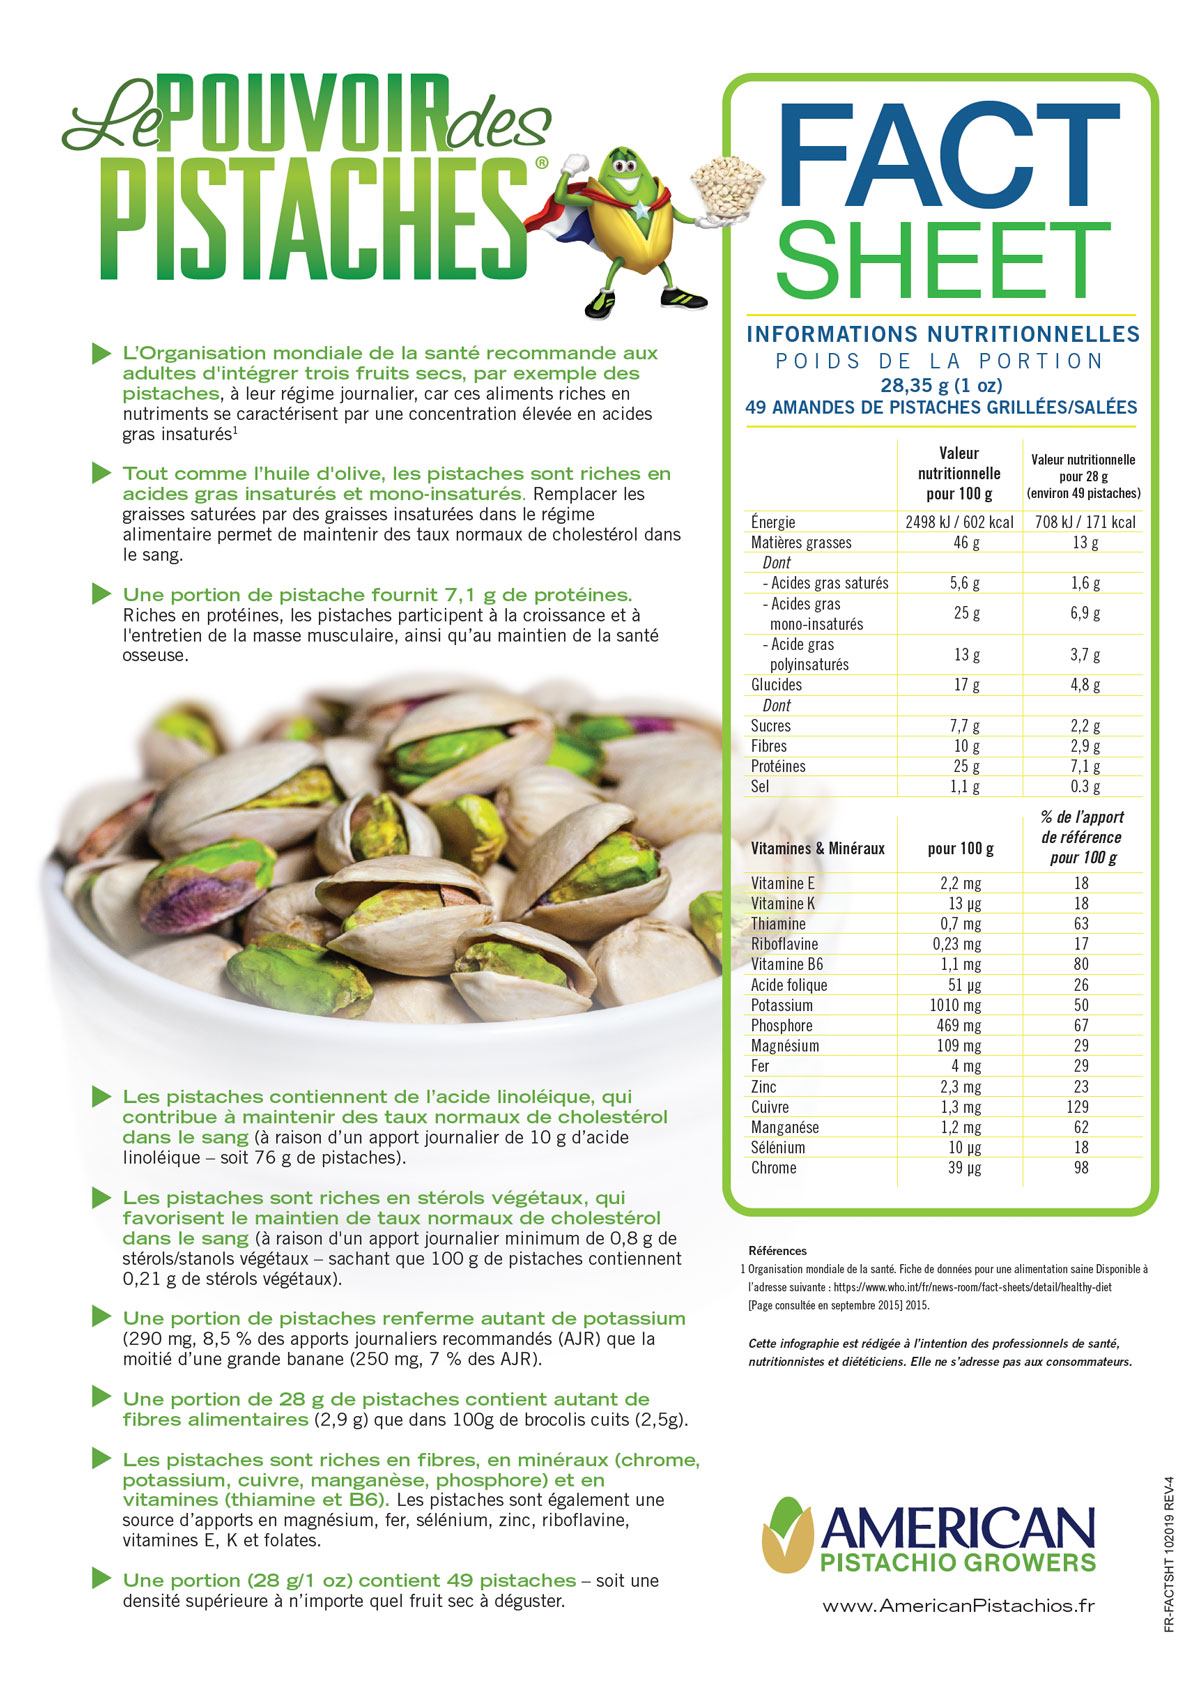 Nutrition Facts Sheet